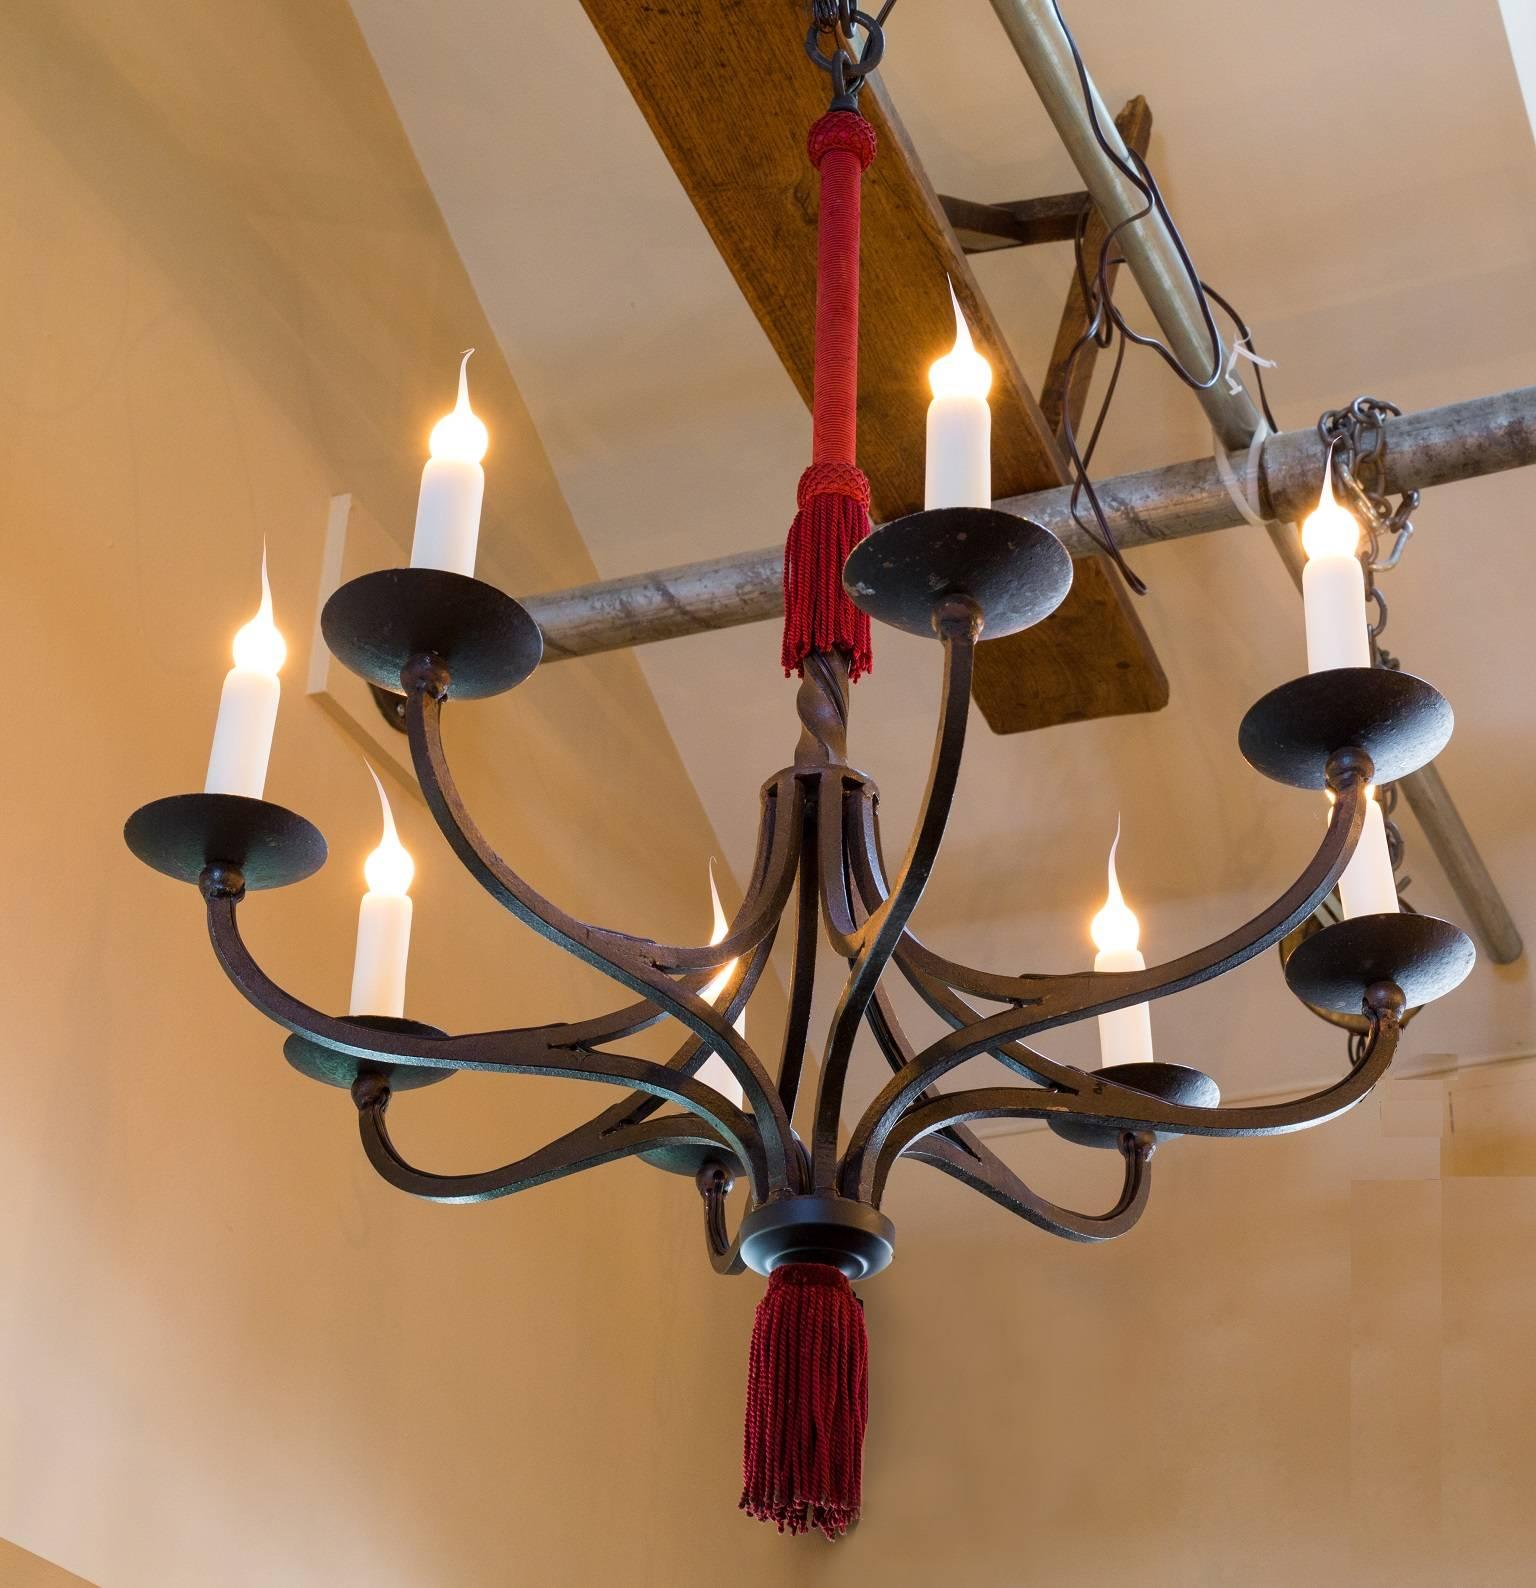 Spanish Colonial Pair of Vintage Spanish Hand-Forged Iron Chandeliers with Original Fringe Accent